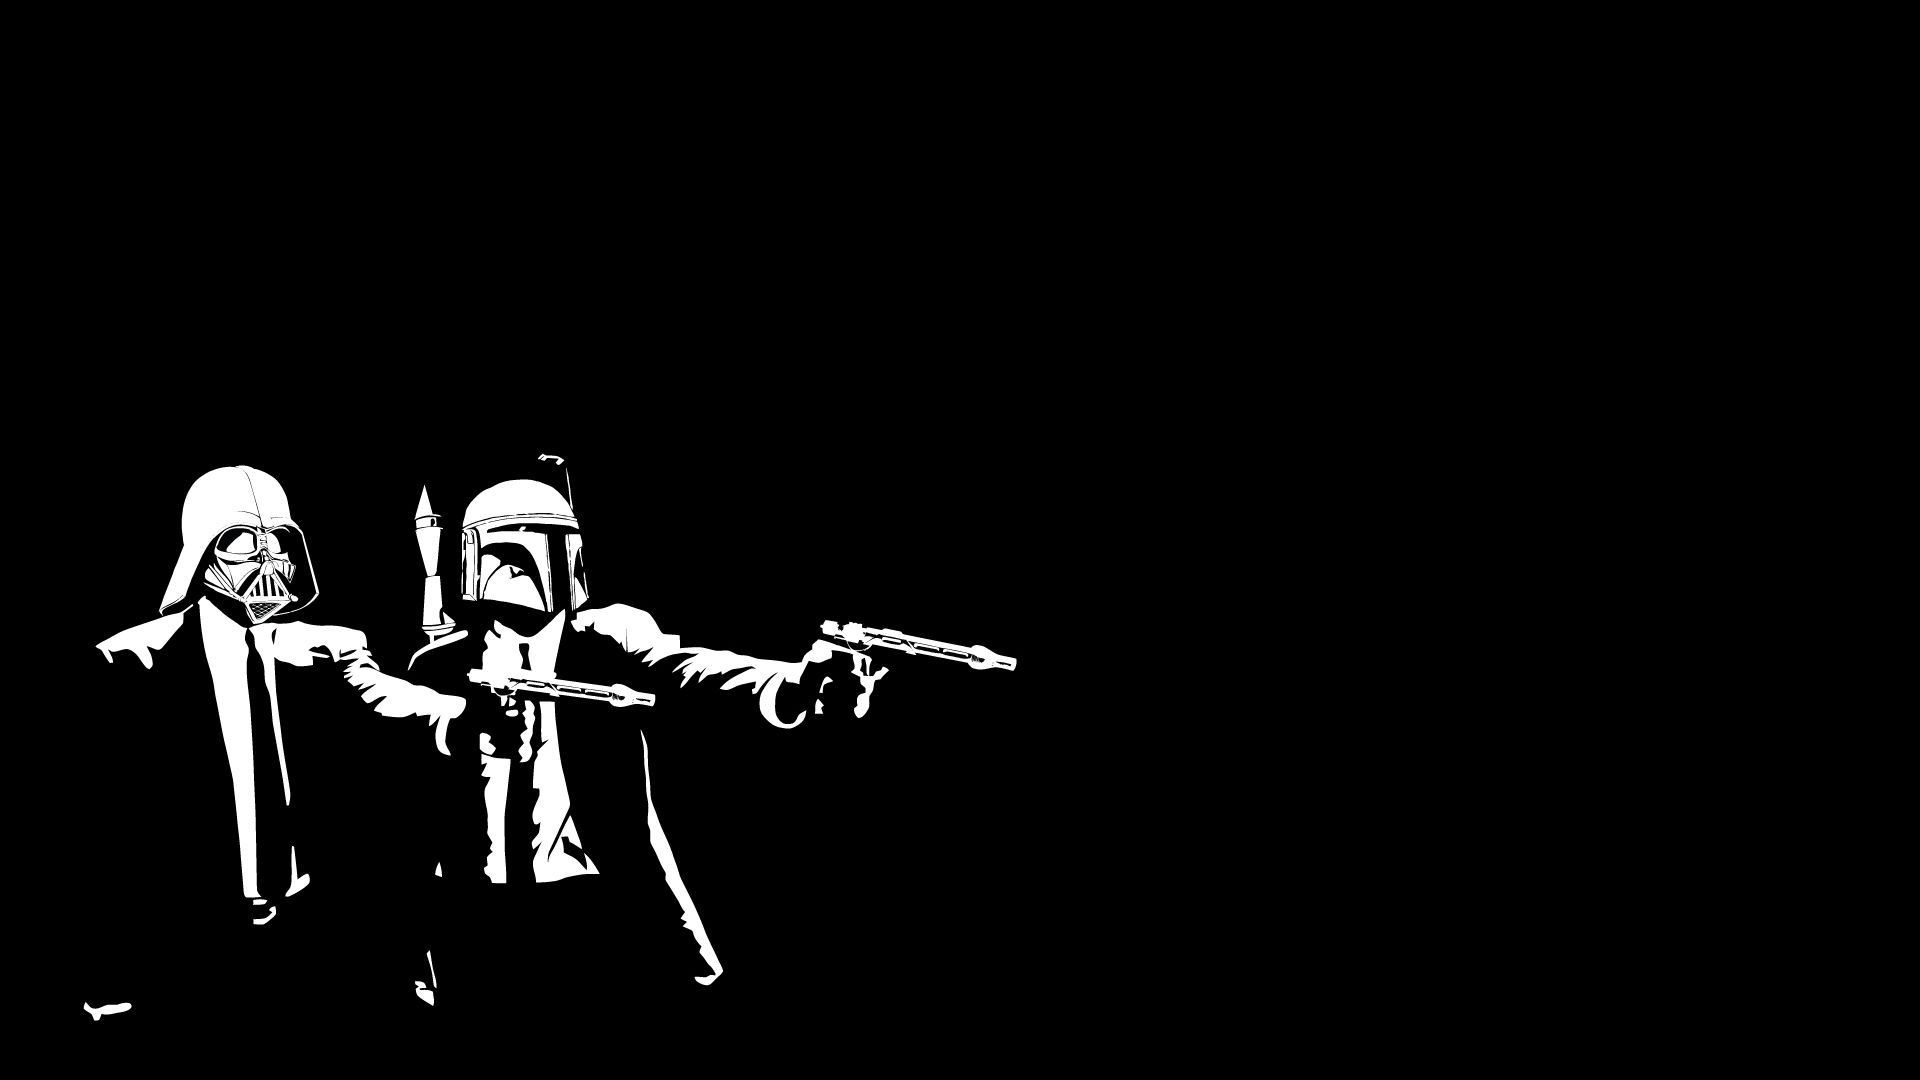 1920x1080 You can view, download and comment on Star Wars Pulp Fiction Crossover free hd  wallpapers